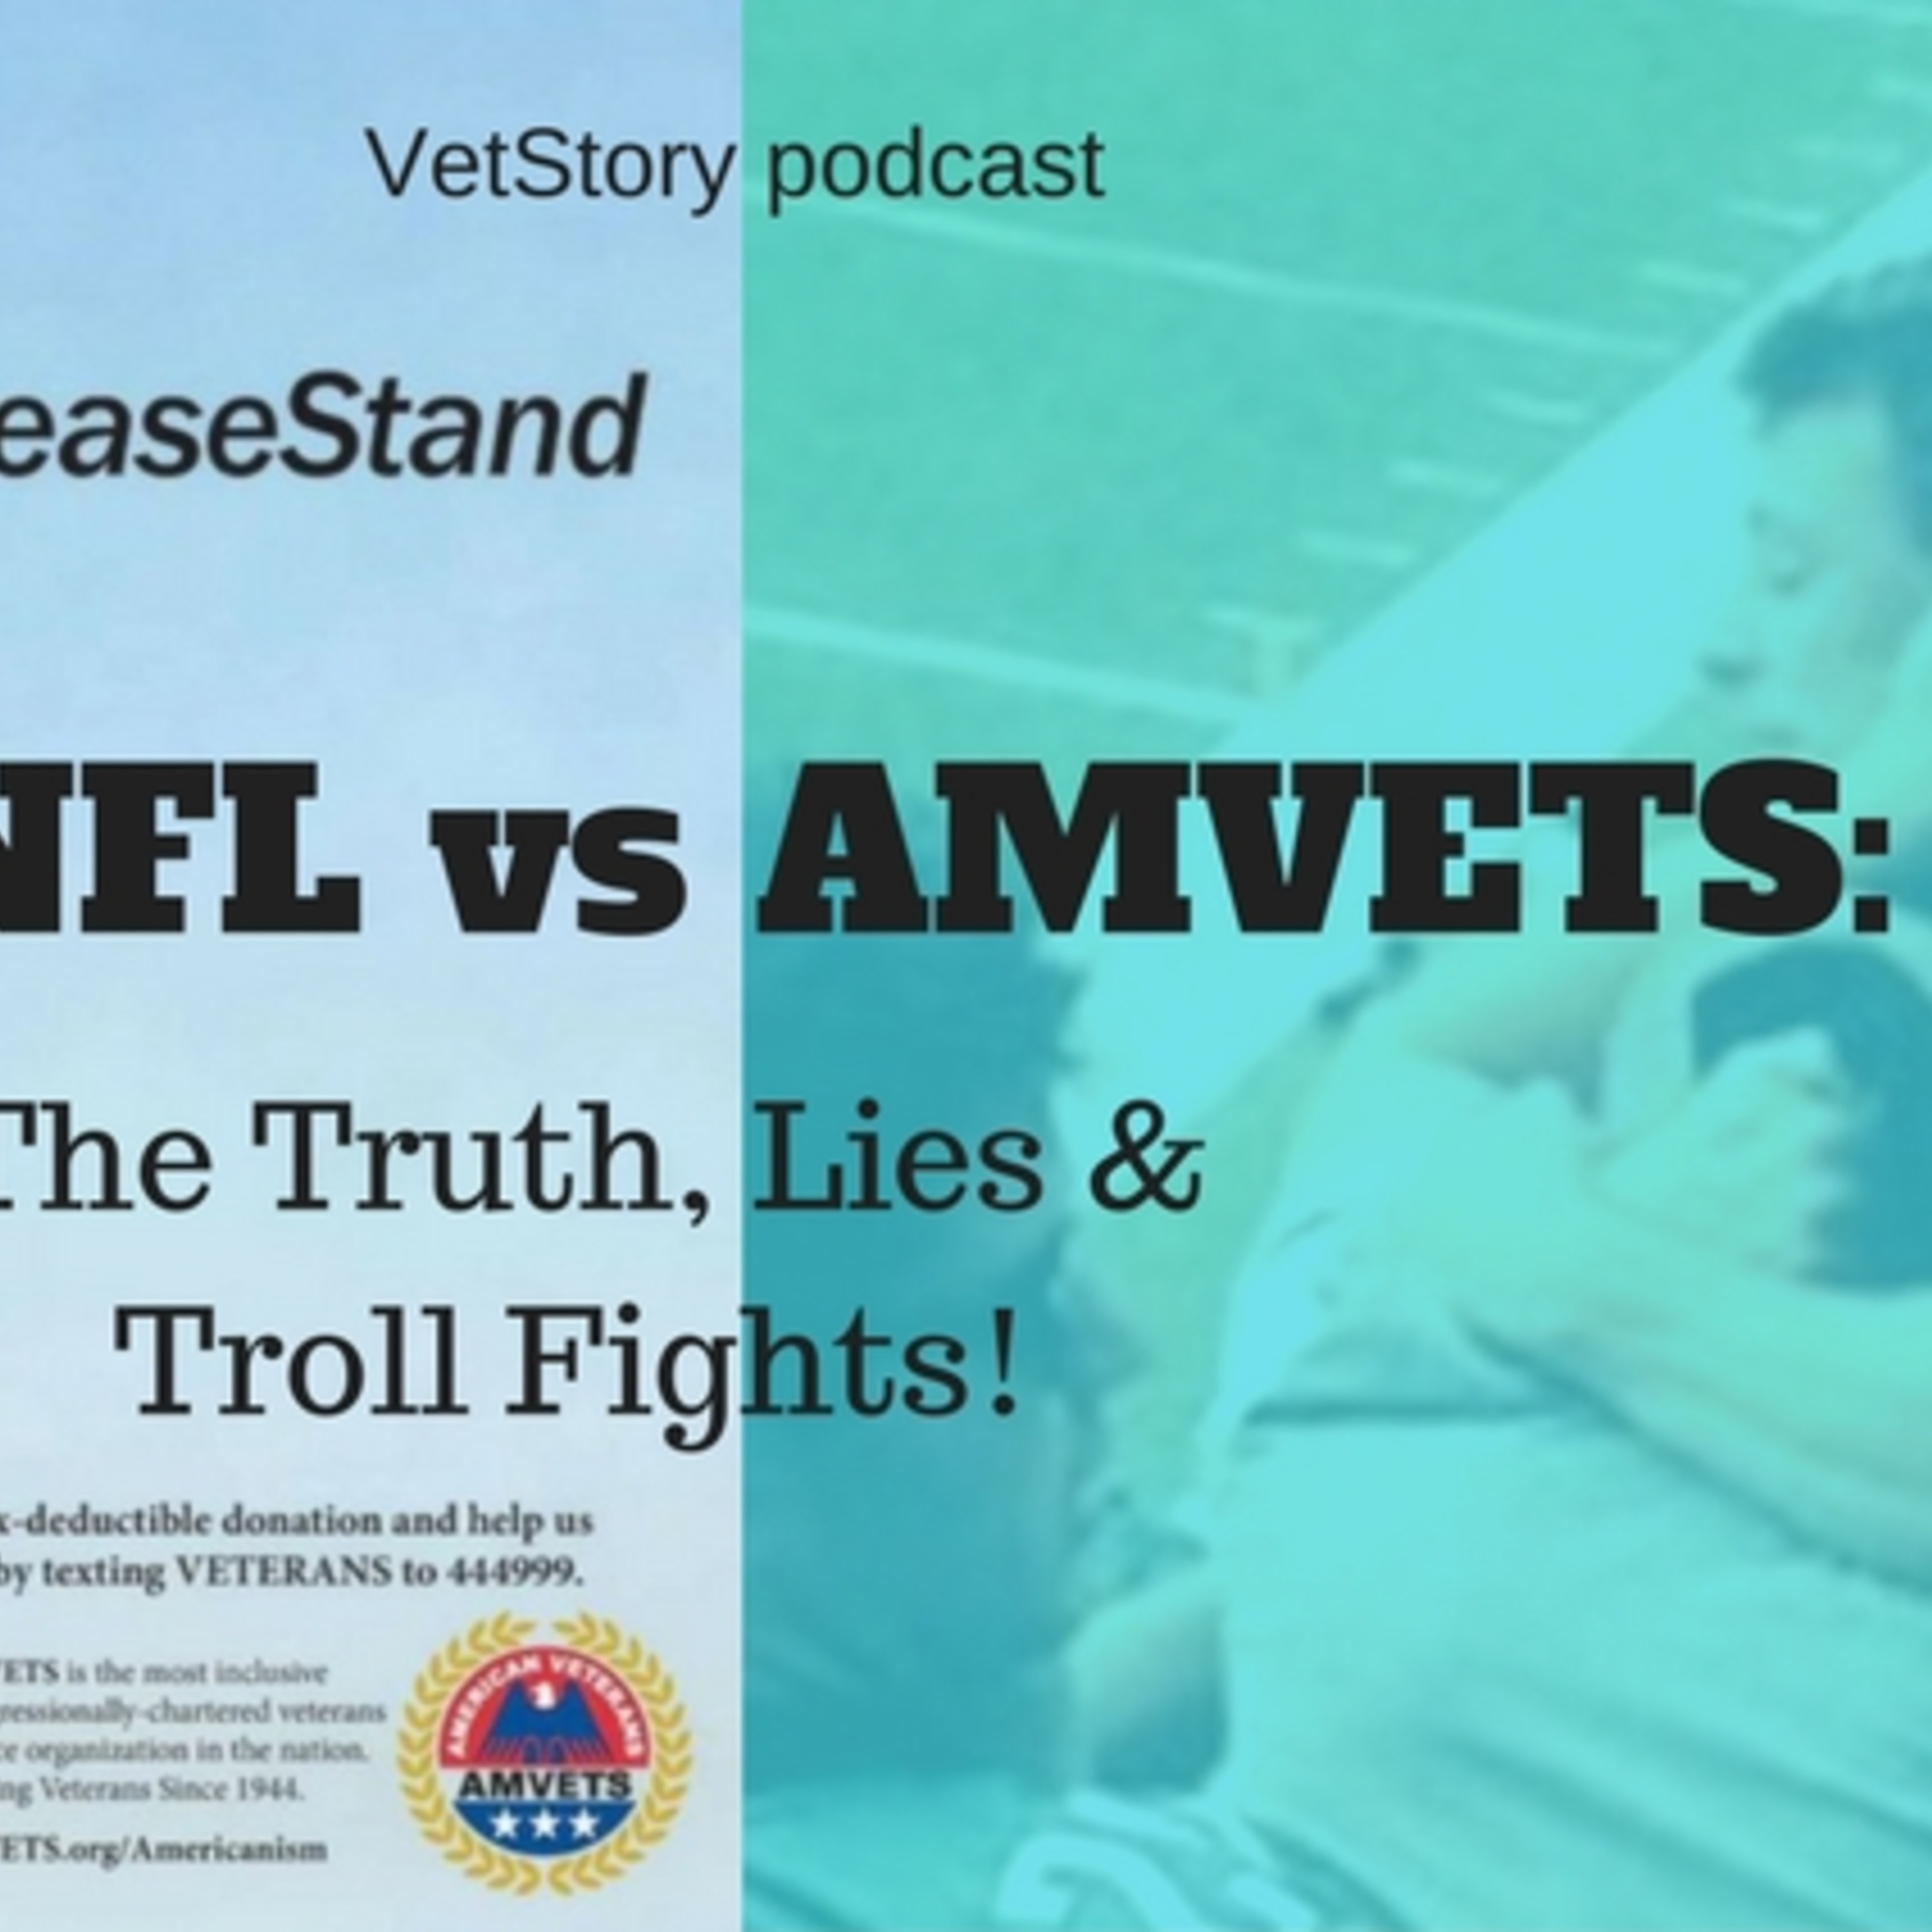 UPDATE: NFL vs. AMVETS- Truth, Lies and Troll Fights